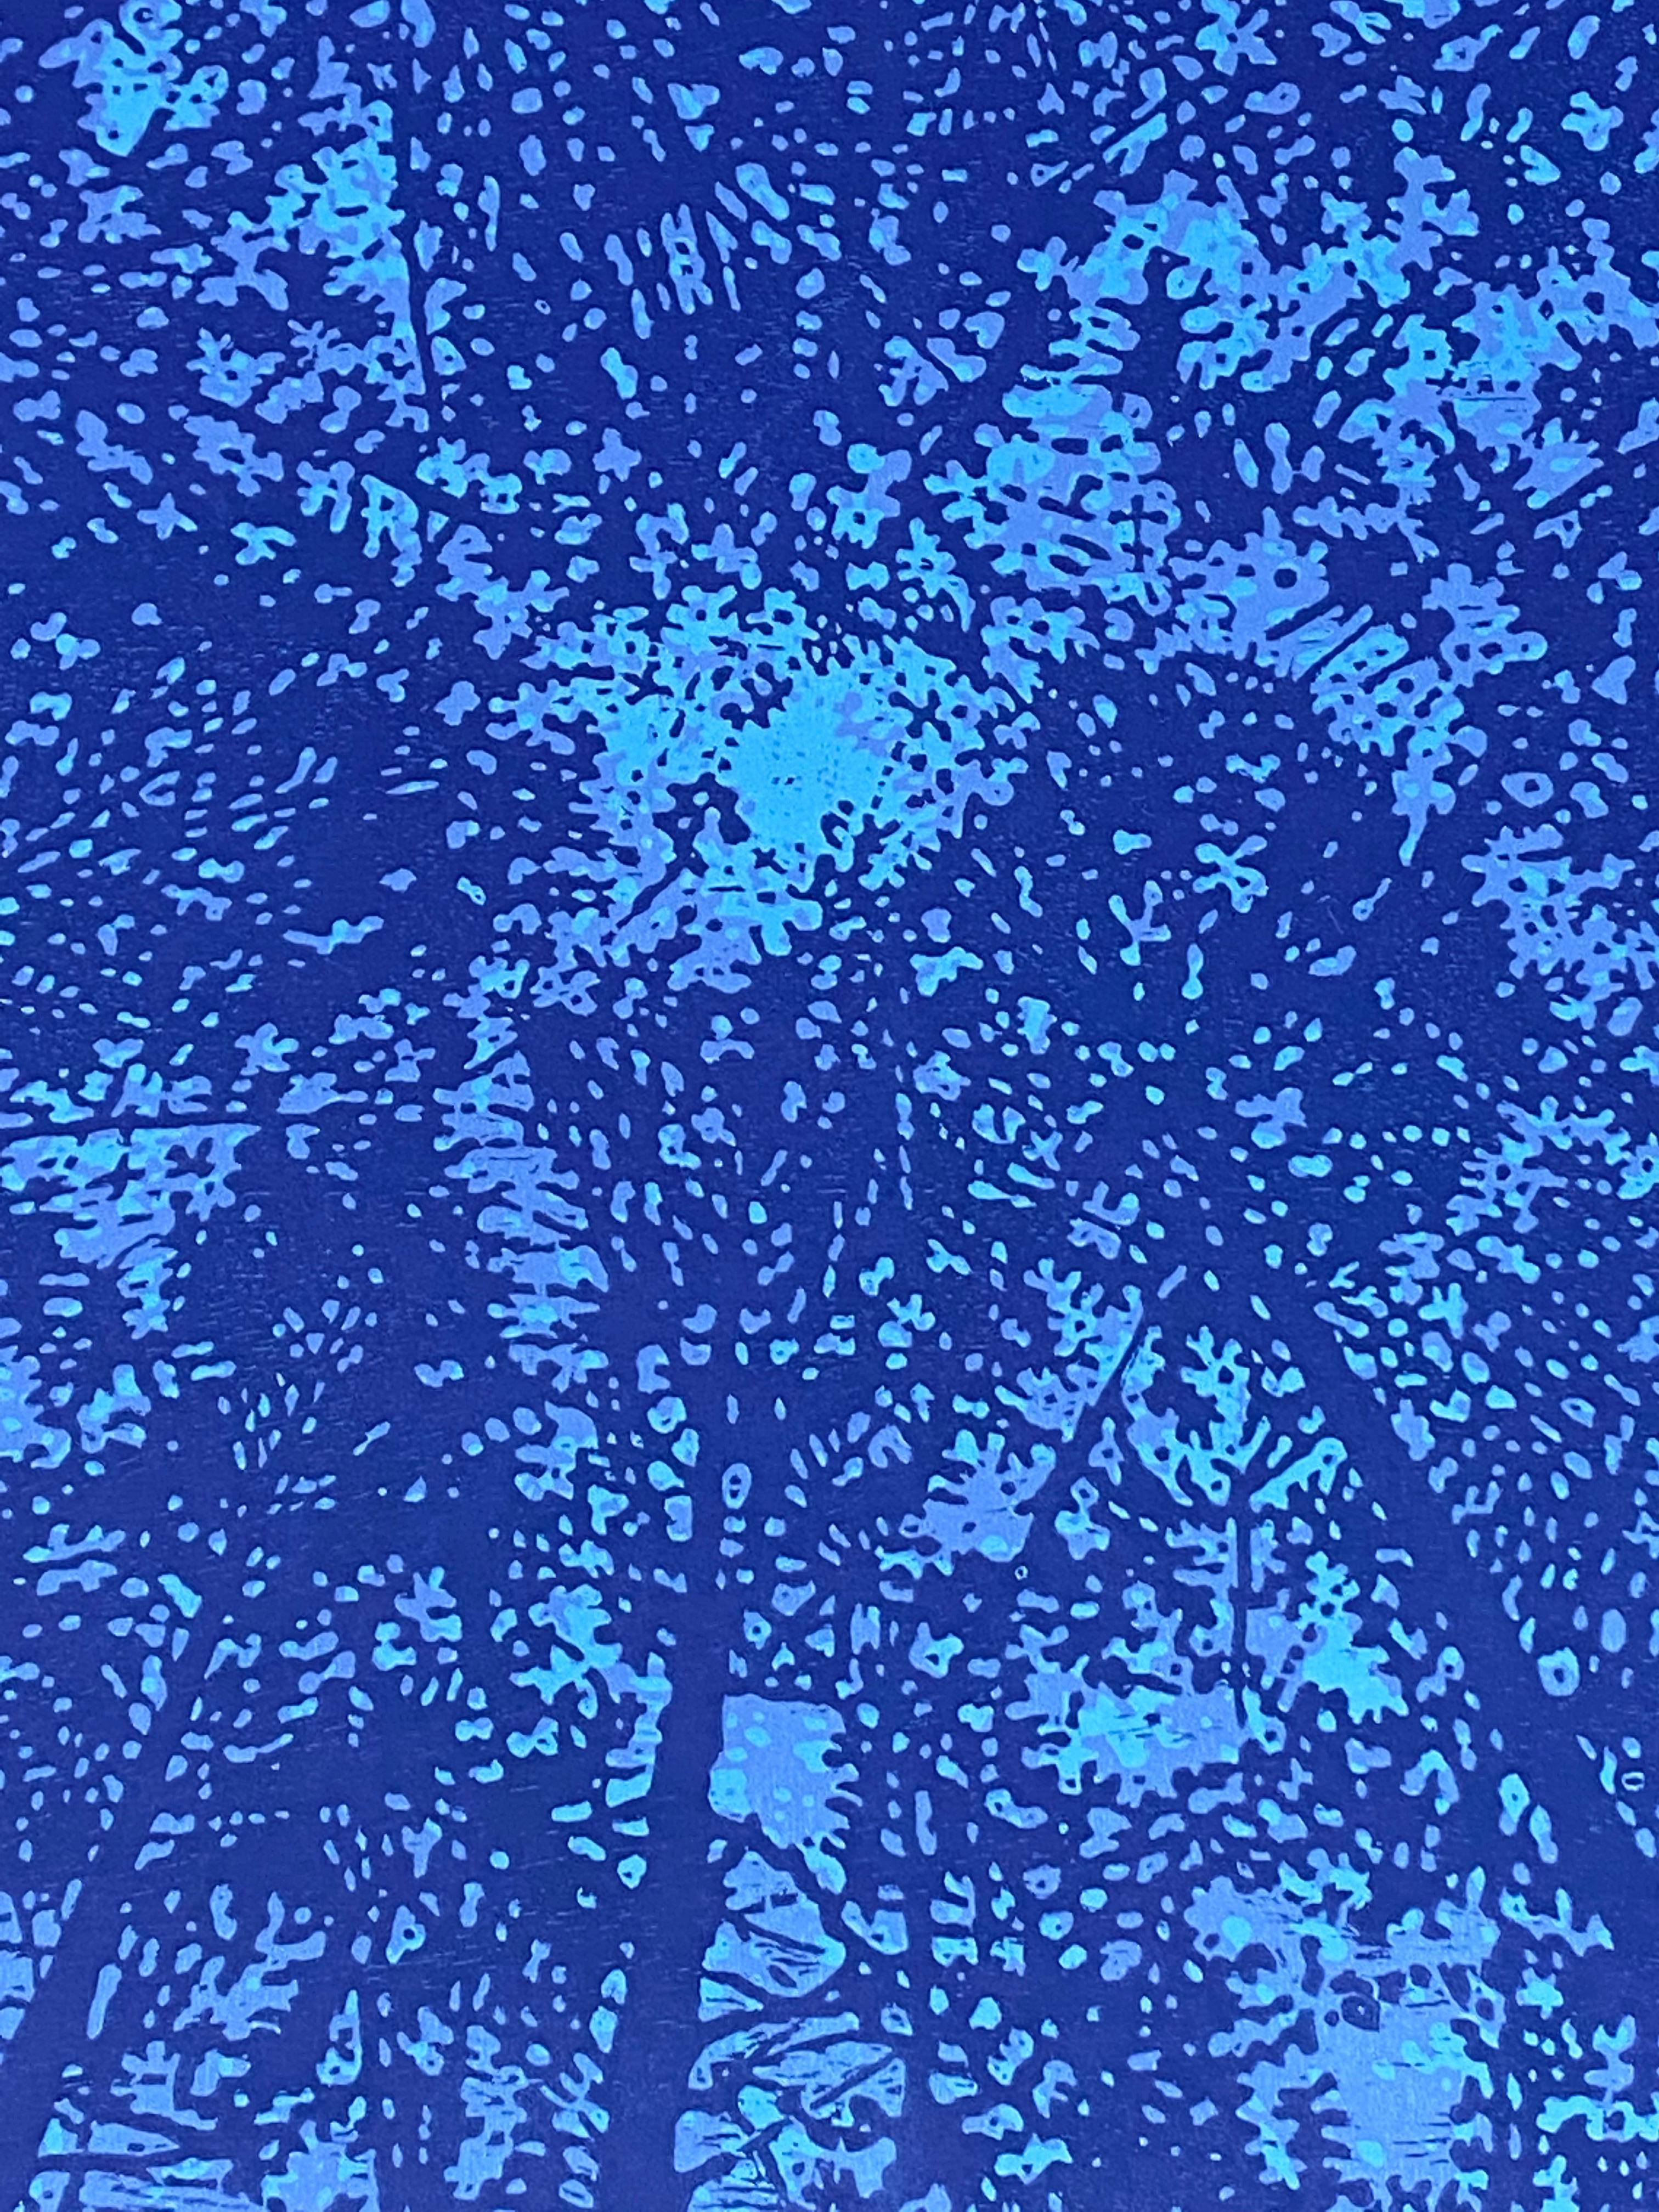 This square woodcut print on paper evokes the peacefulness of looking upwards through a forest canopy in a symmetrical pattern composed of the silhouettes of trees in shades of dark navy, pale blue, and bright,. The monotype brings to mind the